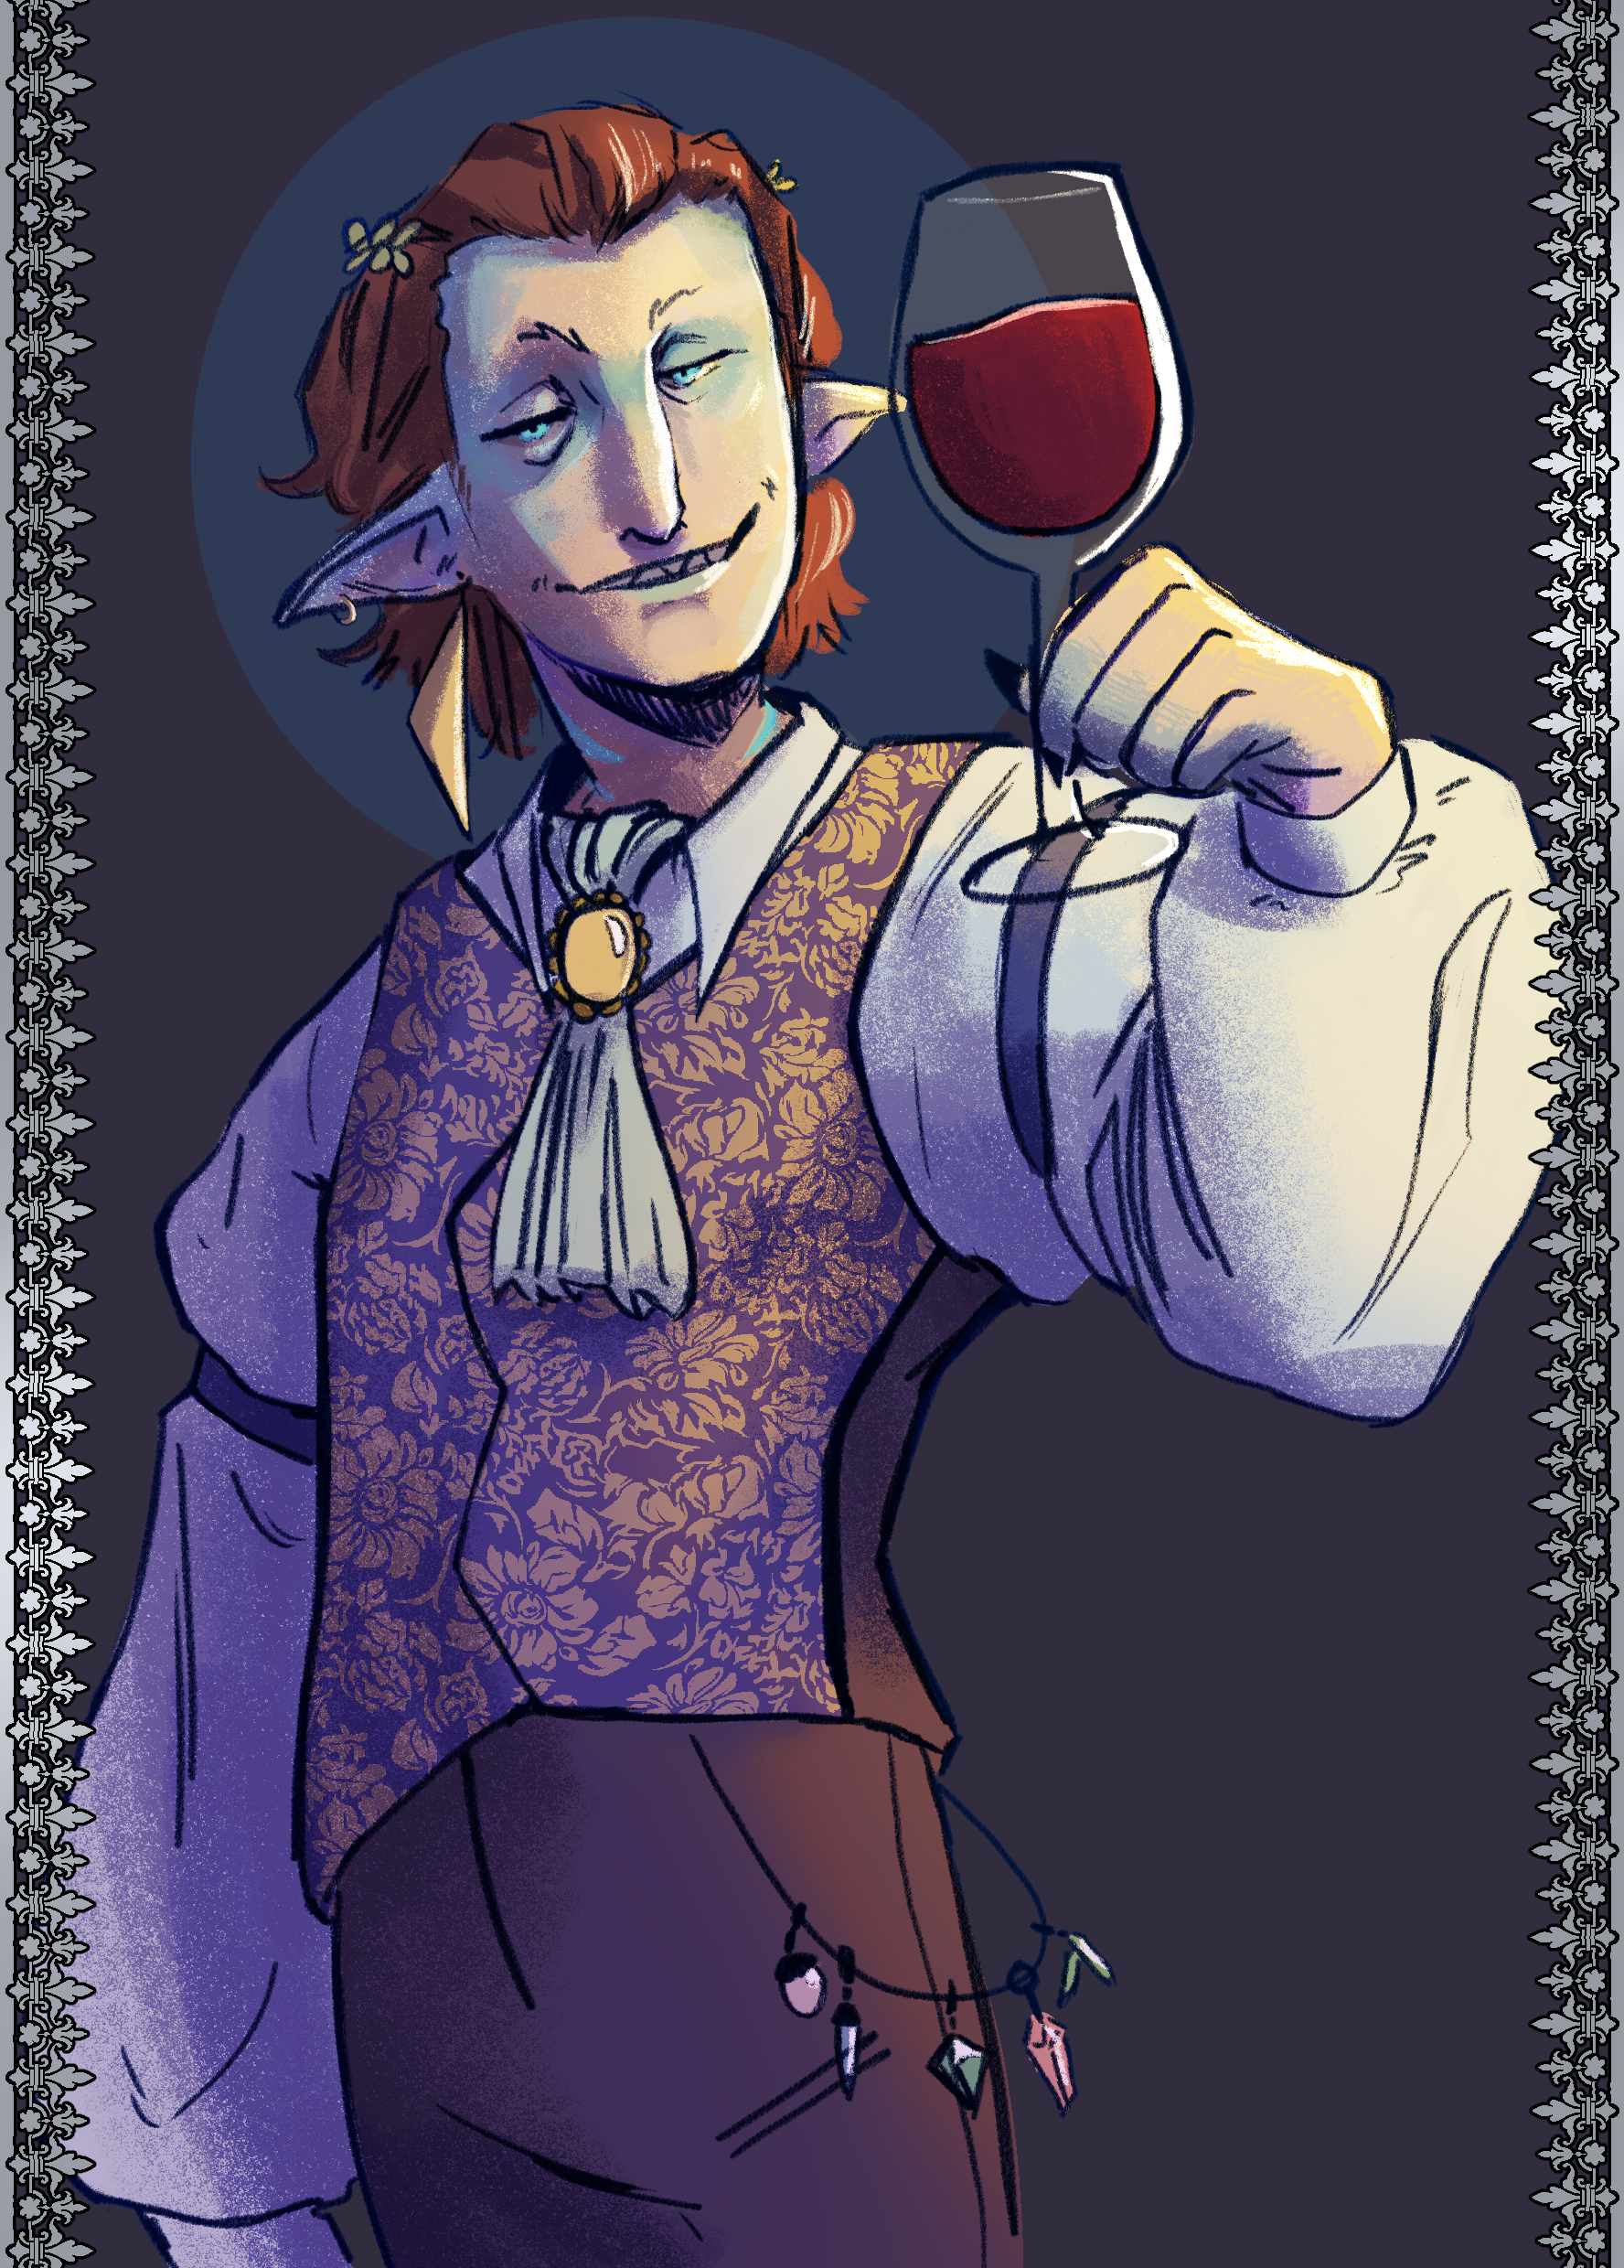 a digital drawing of a very formal looking pale man, from about the thighs up. He is smirking and looking at the viewer, and he's holding up a wine glass as though about to toast to something. He has a floral print vest over a shirt with large, puffy sleeves. The piece is largely in teals and purples, with yellow for accent.